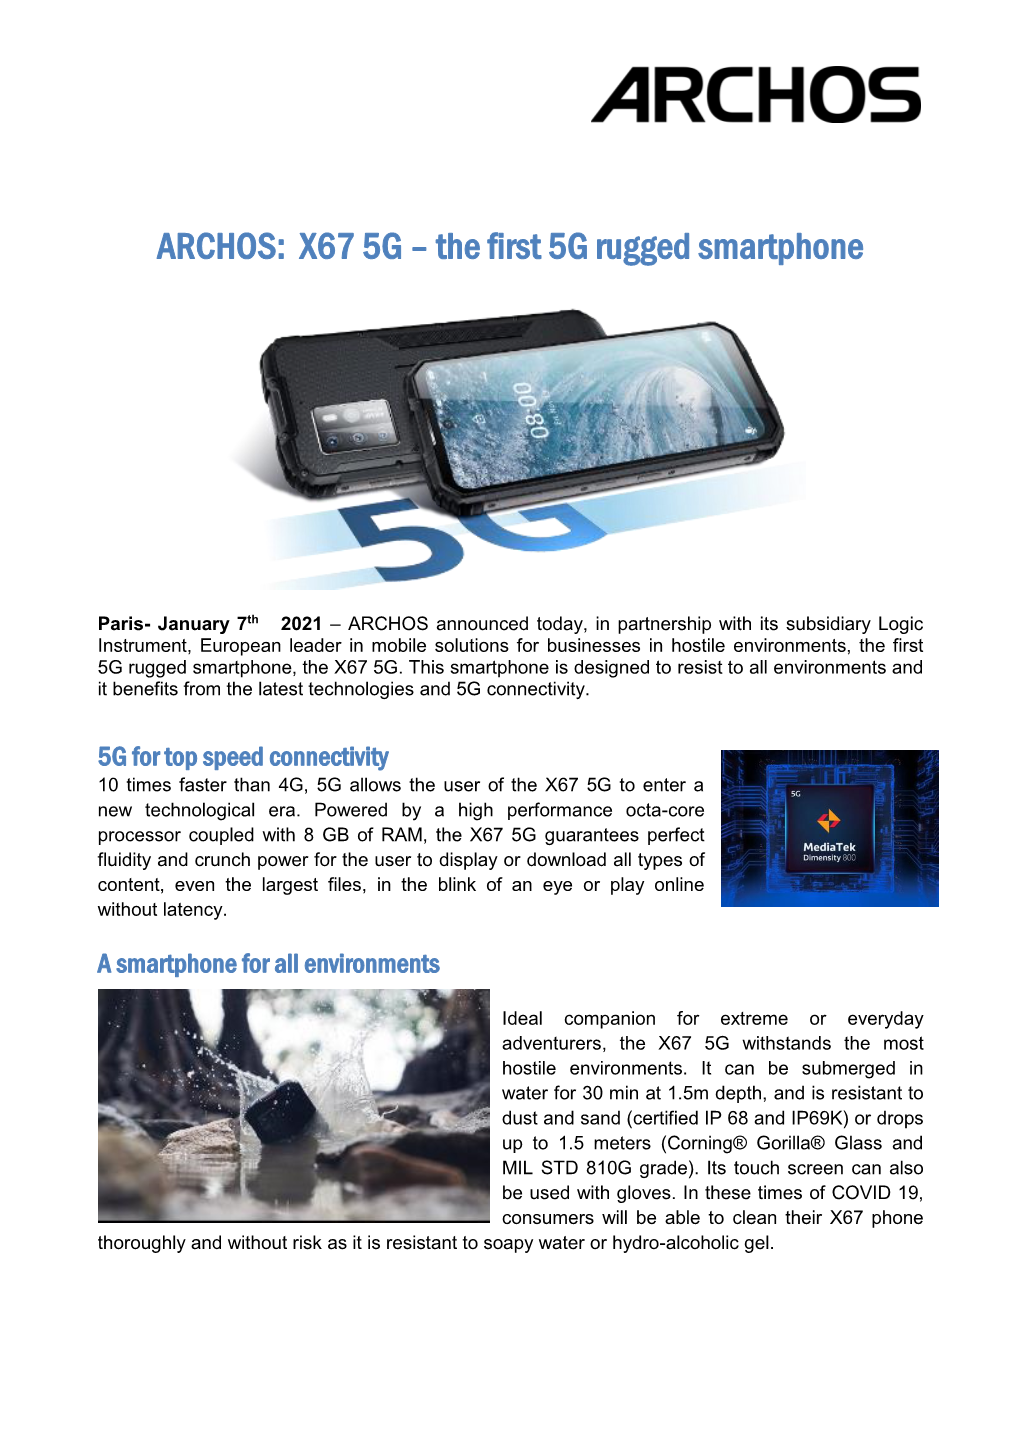 X67 5G – the First 5G Rugged Smartphone